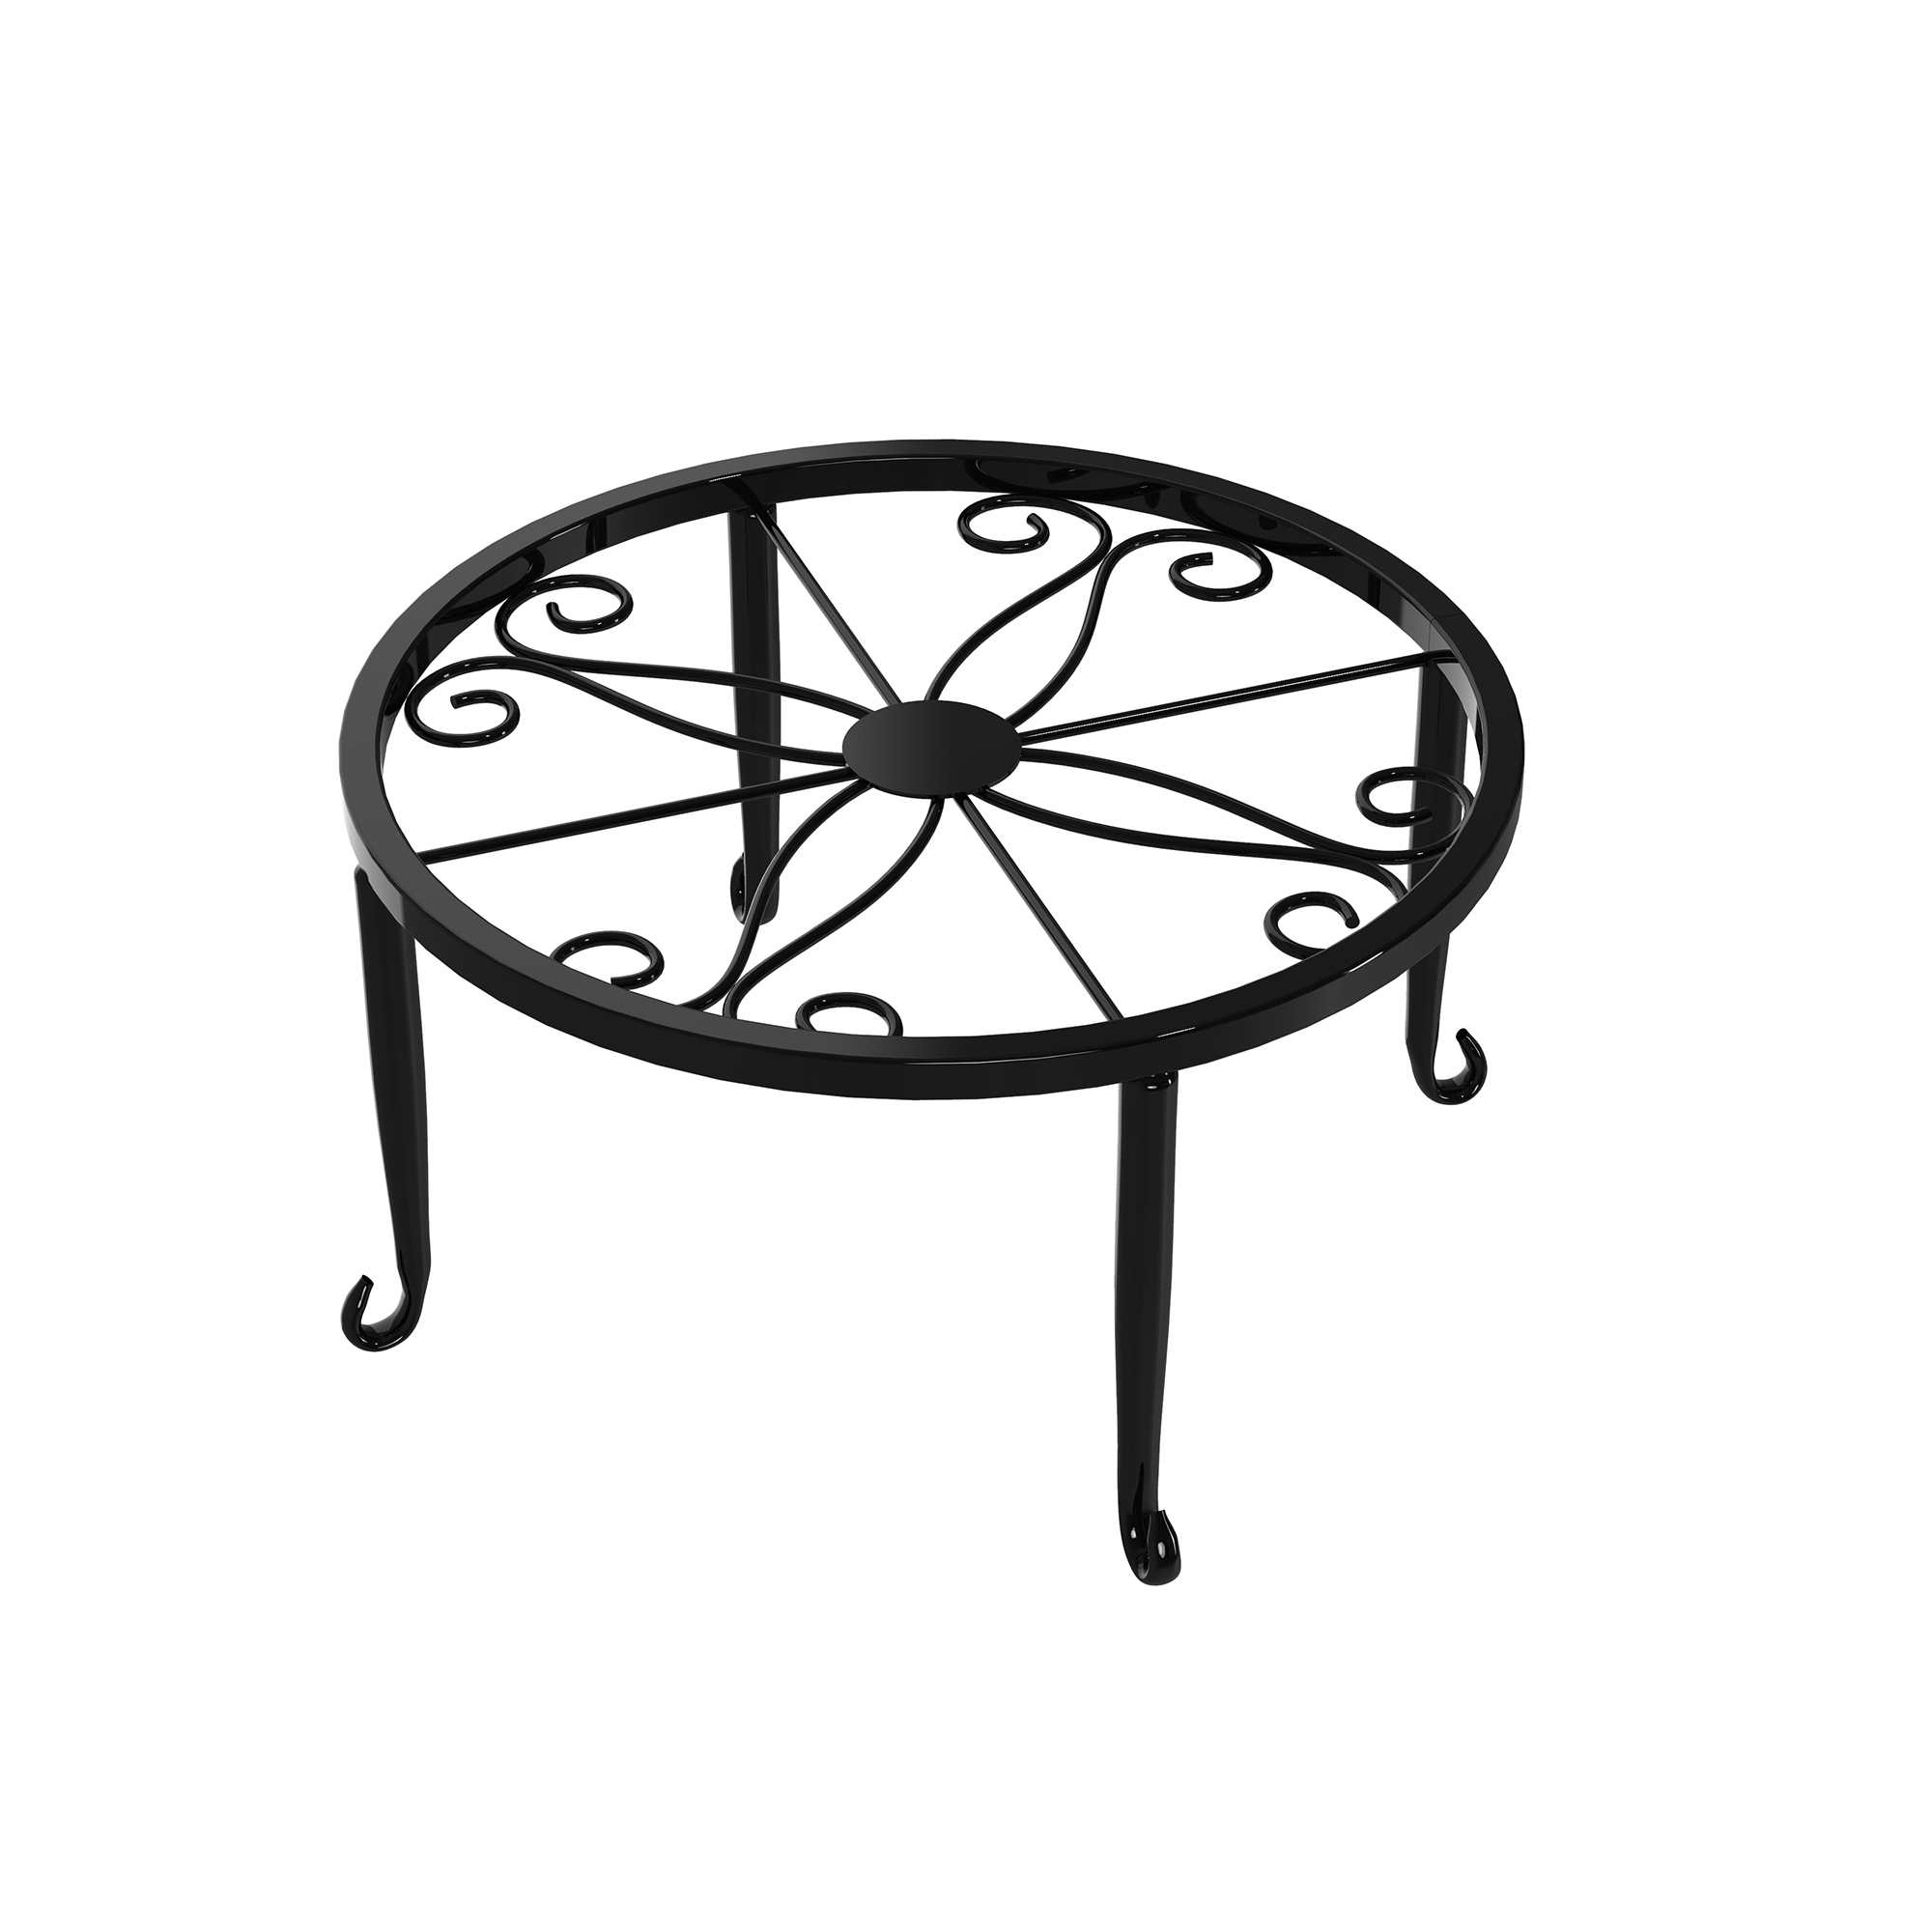 4 Pack Round Metal Plant Stand